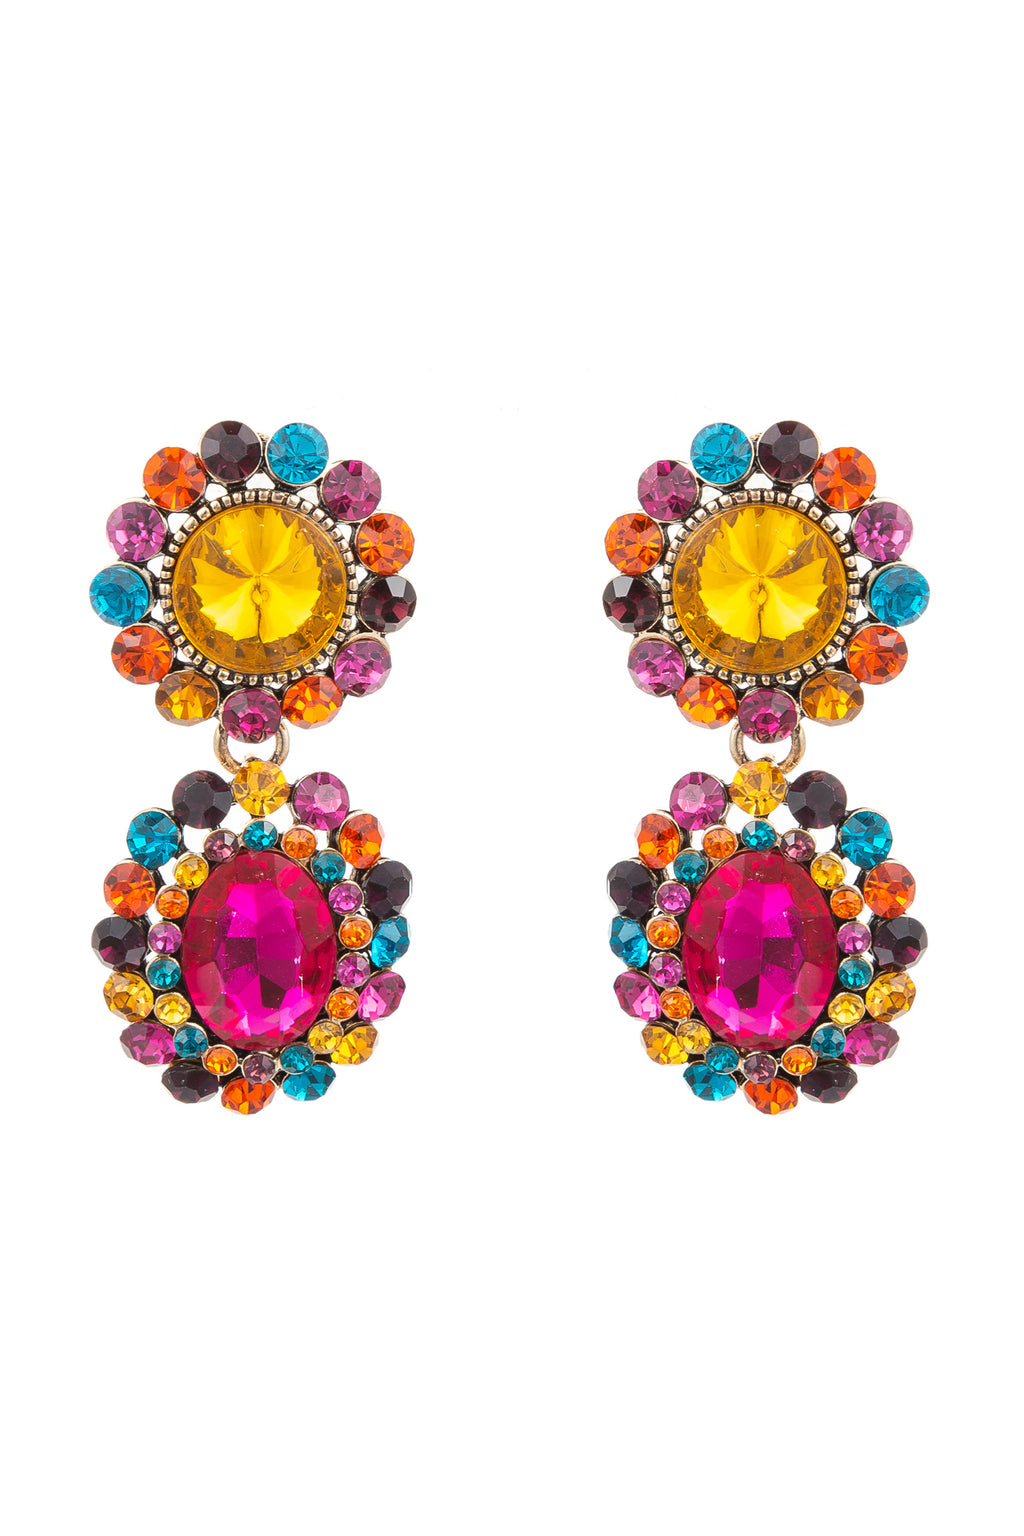 Yellow alloy cascading mini drop earrings studded with glass crystals.